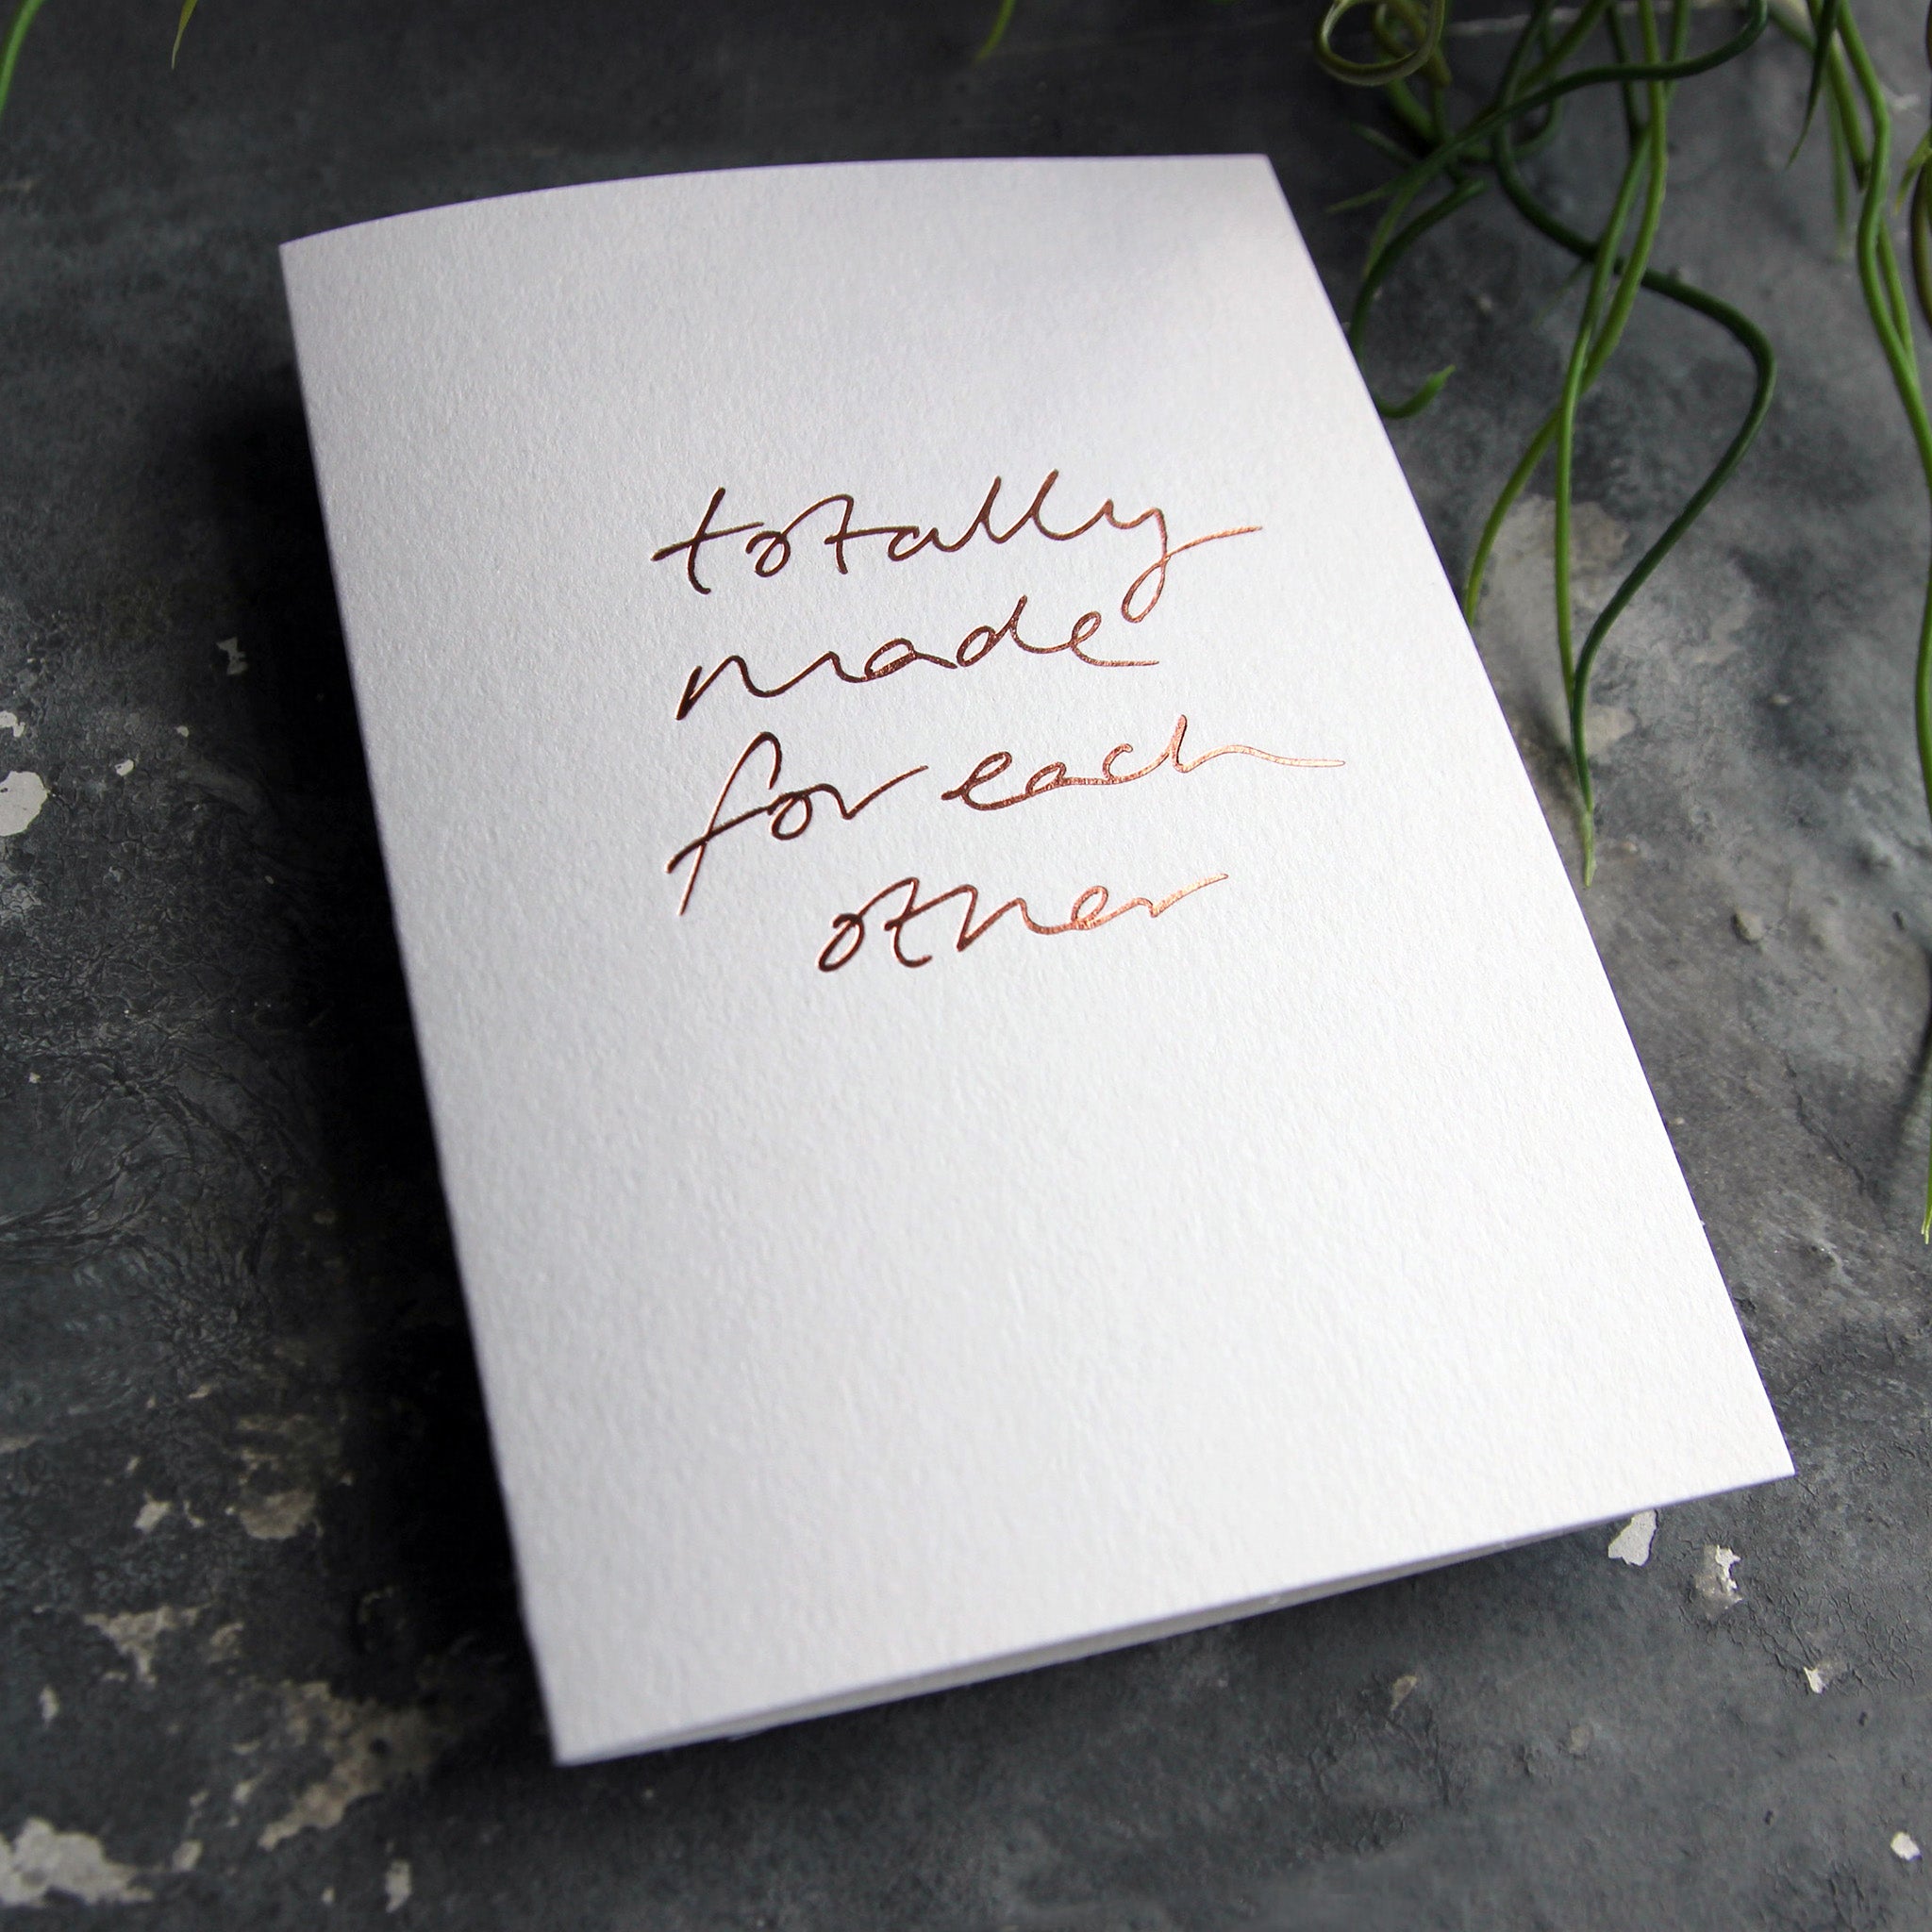 Luxury white greetings card with "Totally Made For Each Other' handwritten in the front and hand printed in rose gold foil on a grey background with some green plant leaves at the side.